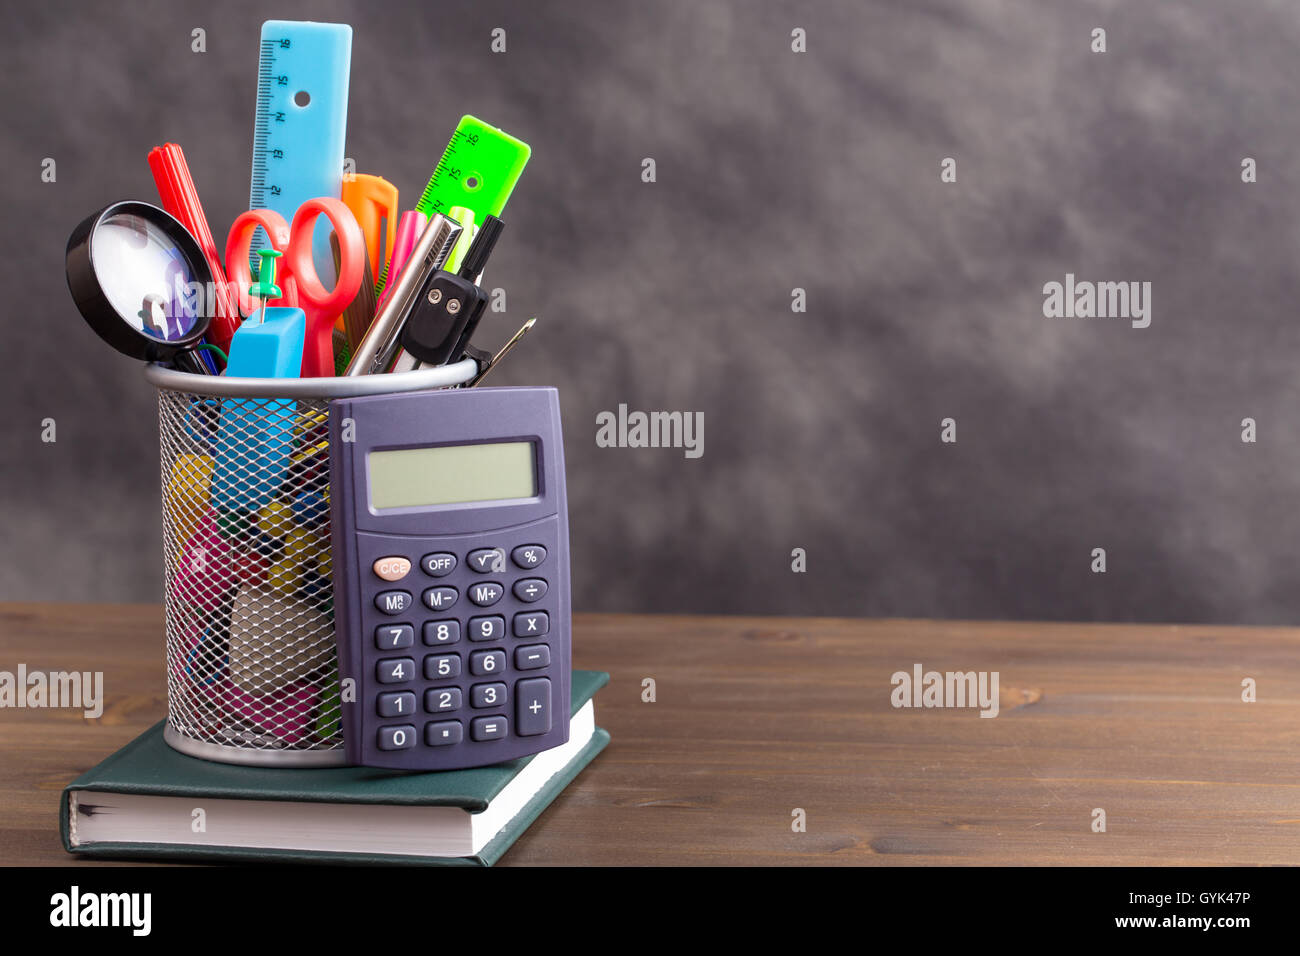 Stationery items with calculator at left side on wooden table Stock Photo